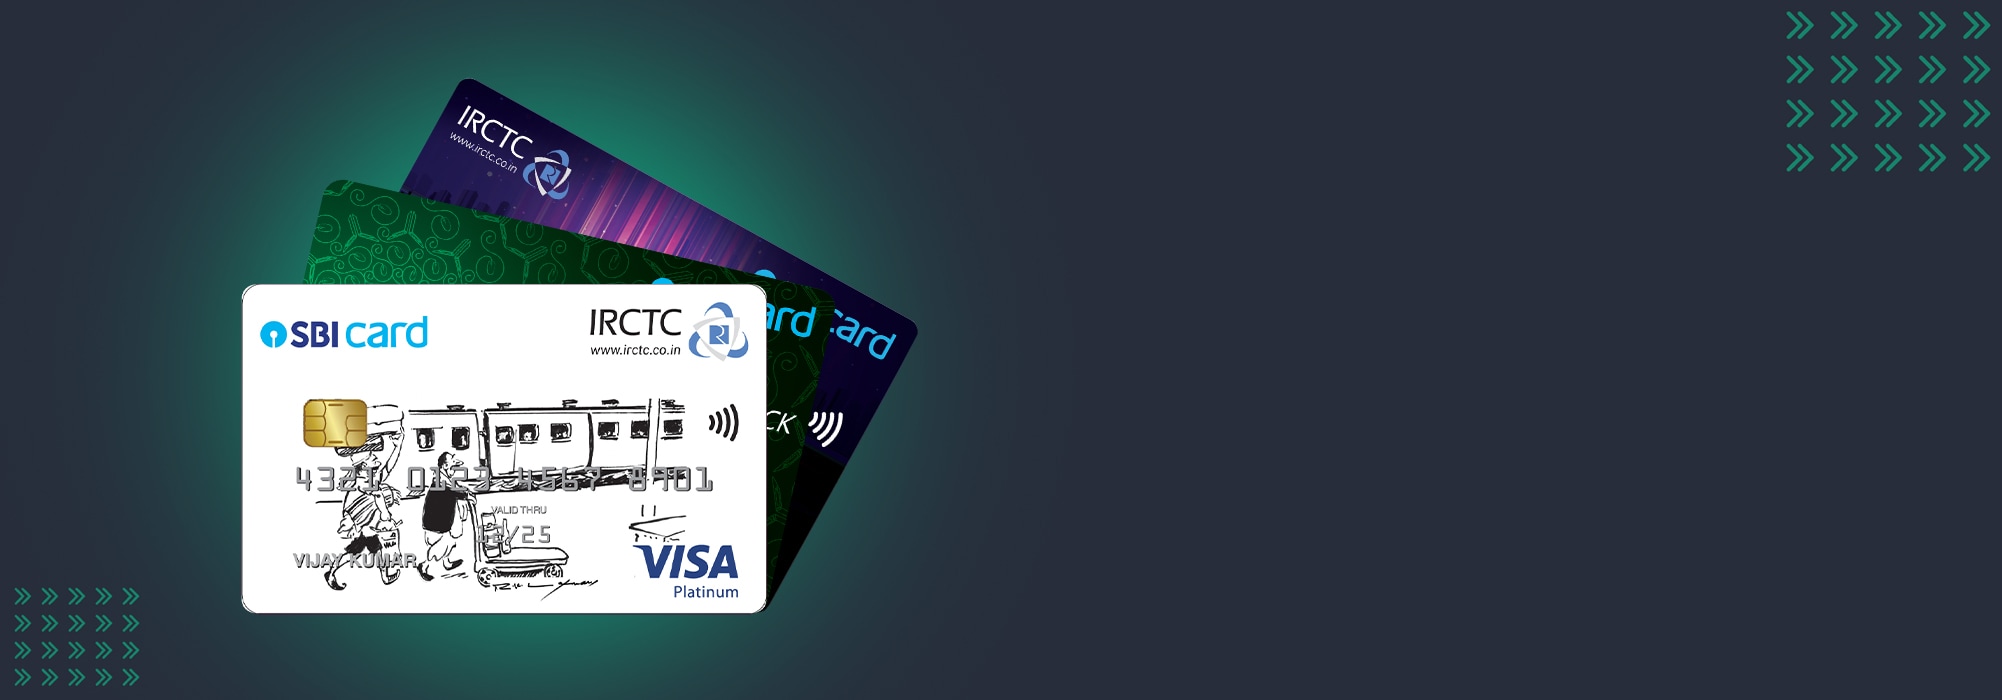 How to Cancel The SBI Credit Card